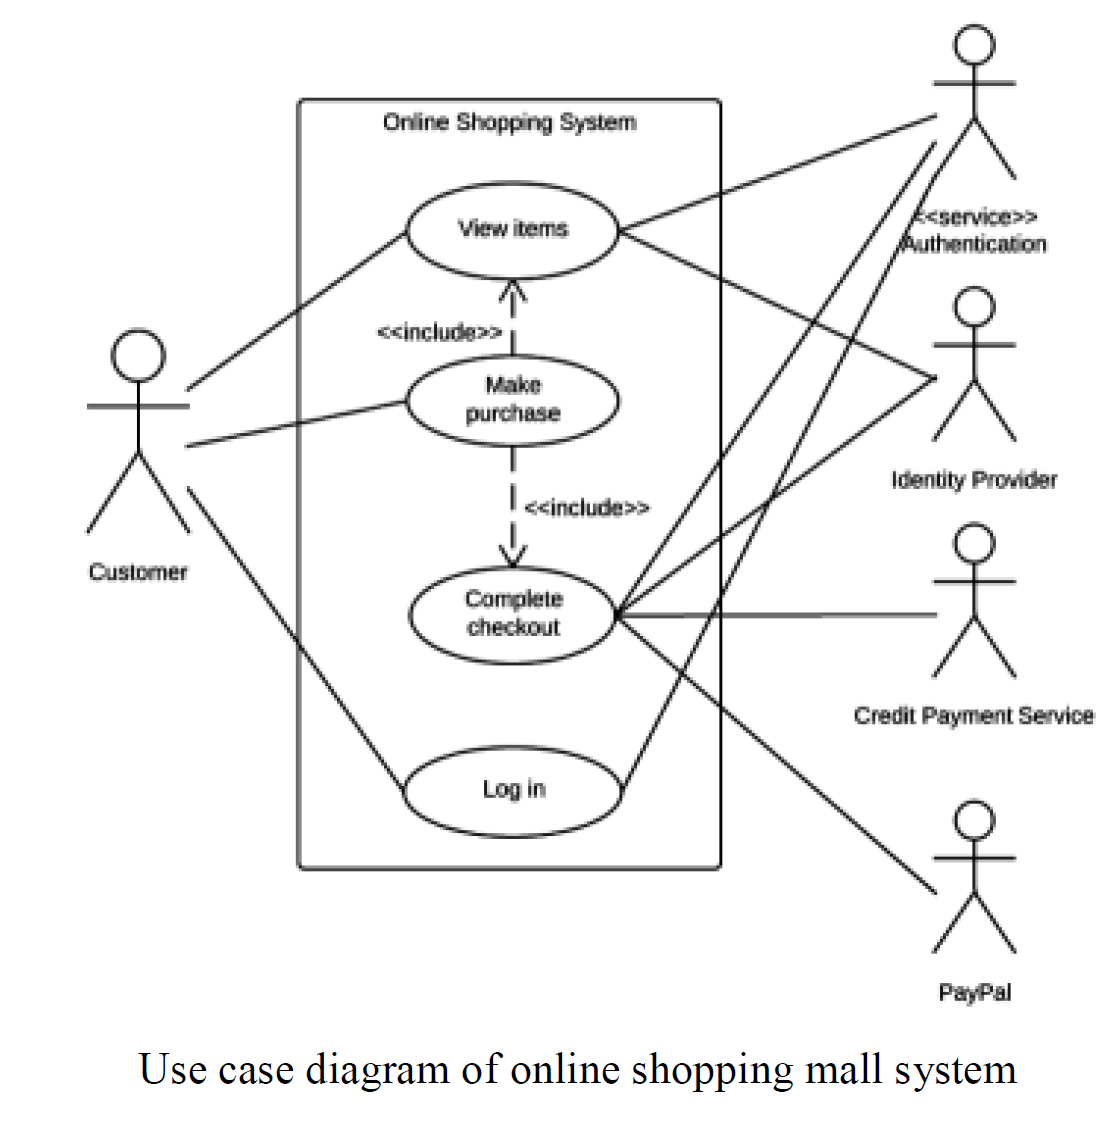 Online Shopping System
Aservice>>
Authentication
View items
<cinclude>
Make
purchase
Identity Provider
<cinclude>>
Customer
Complete
checkout
Credit Payment Service
Log in
PayPal
Usc case diagram of online shopping mall system
ot
